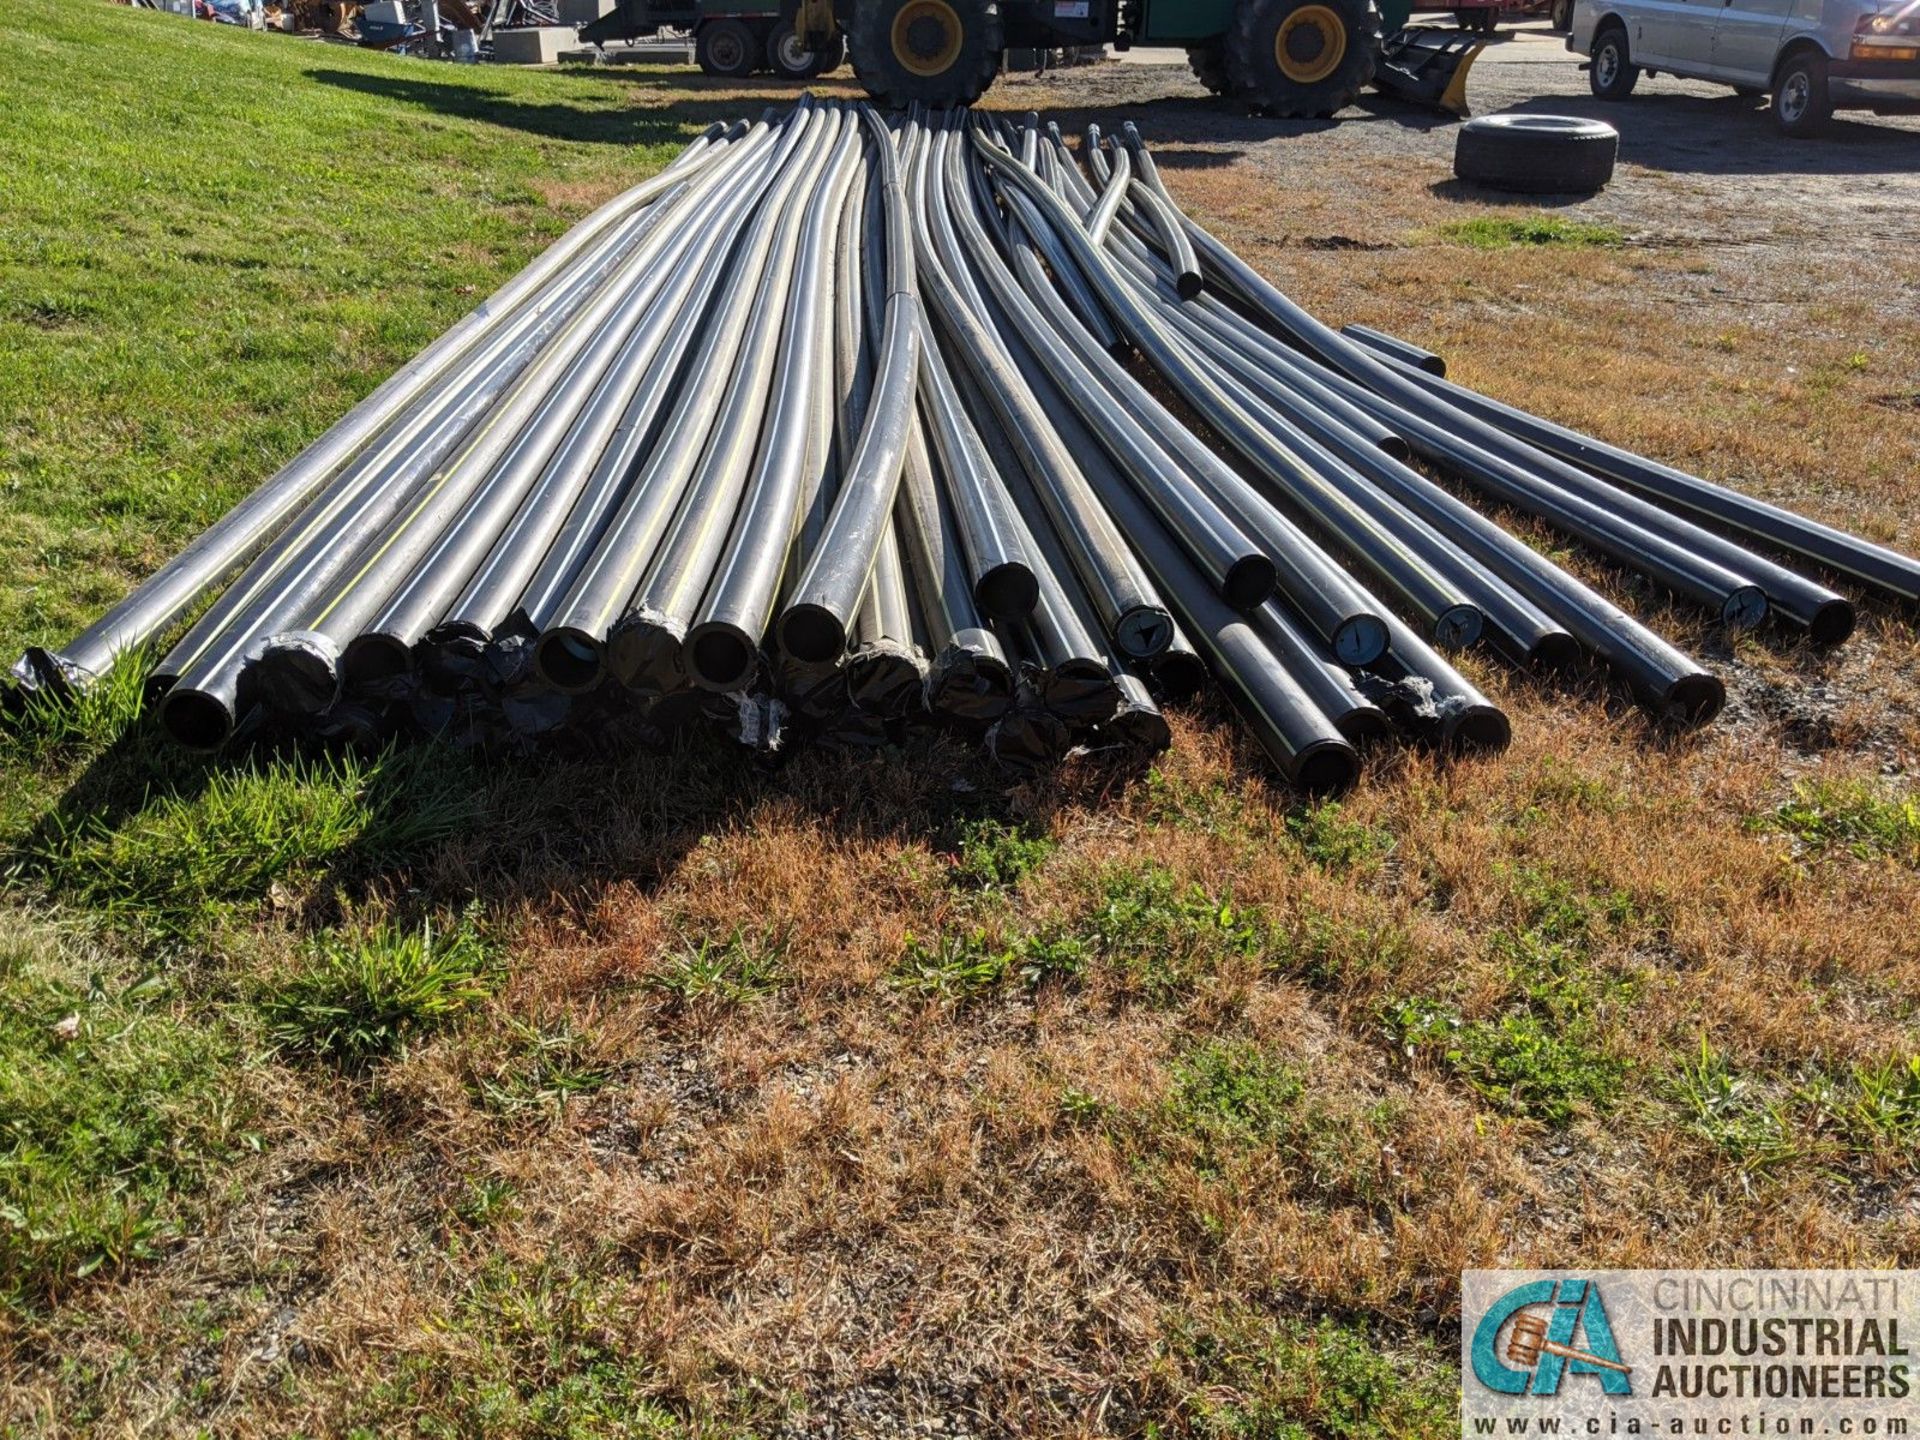 JOINTS OF 4" DIA. X 45' LONG BLACK PLASTIC PIPE (220 Blackbrook Rd., Painsville, OH 44077 - Greg - Image 2 of 3